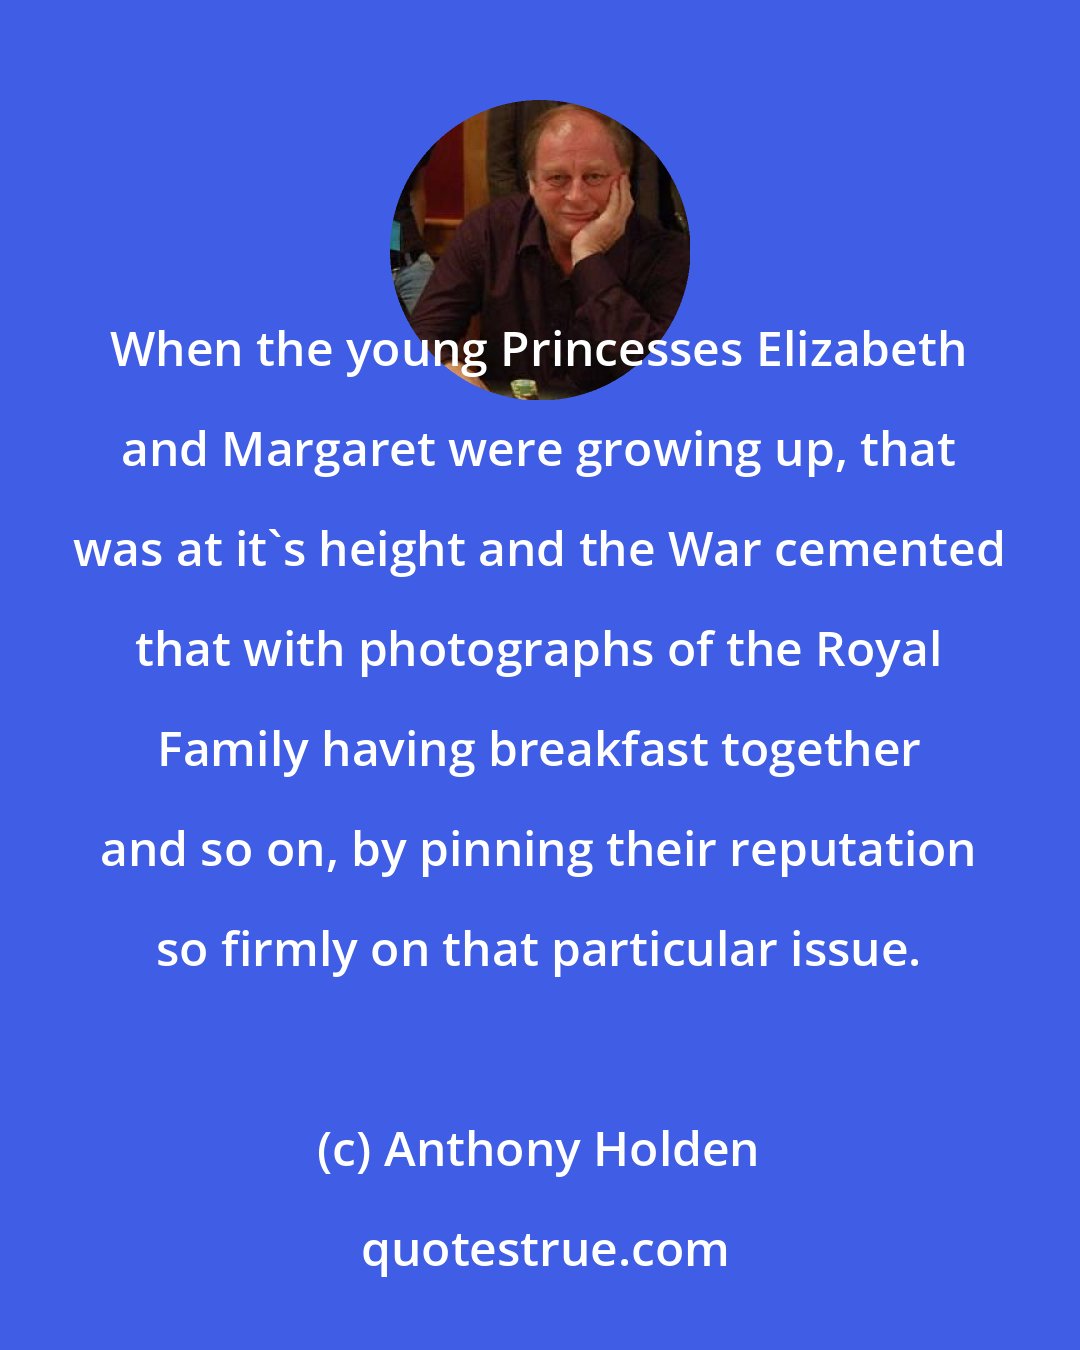 Anthony Holden: When the young Princesses Elizabeth and Margaret were growing up, that was at it's height and the War cemented that with photographs of the Royal Family having breakfast together and so on, by pinning their reputation so firmly on that particular issue.